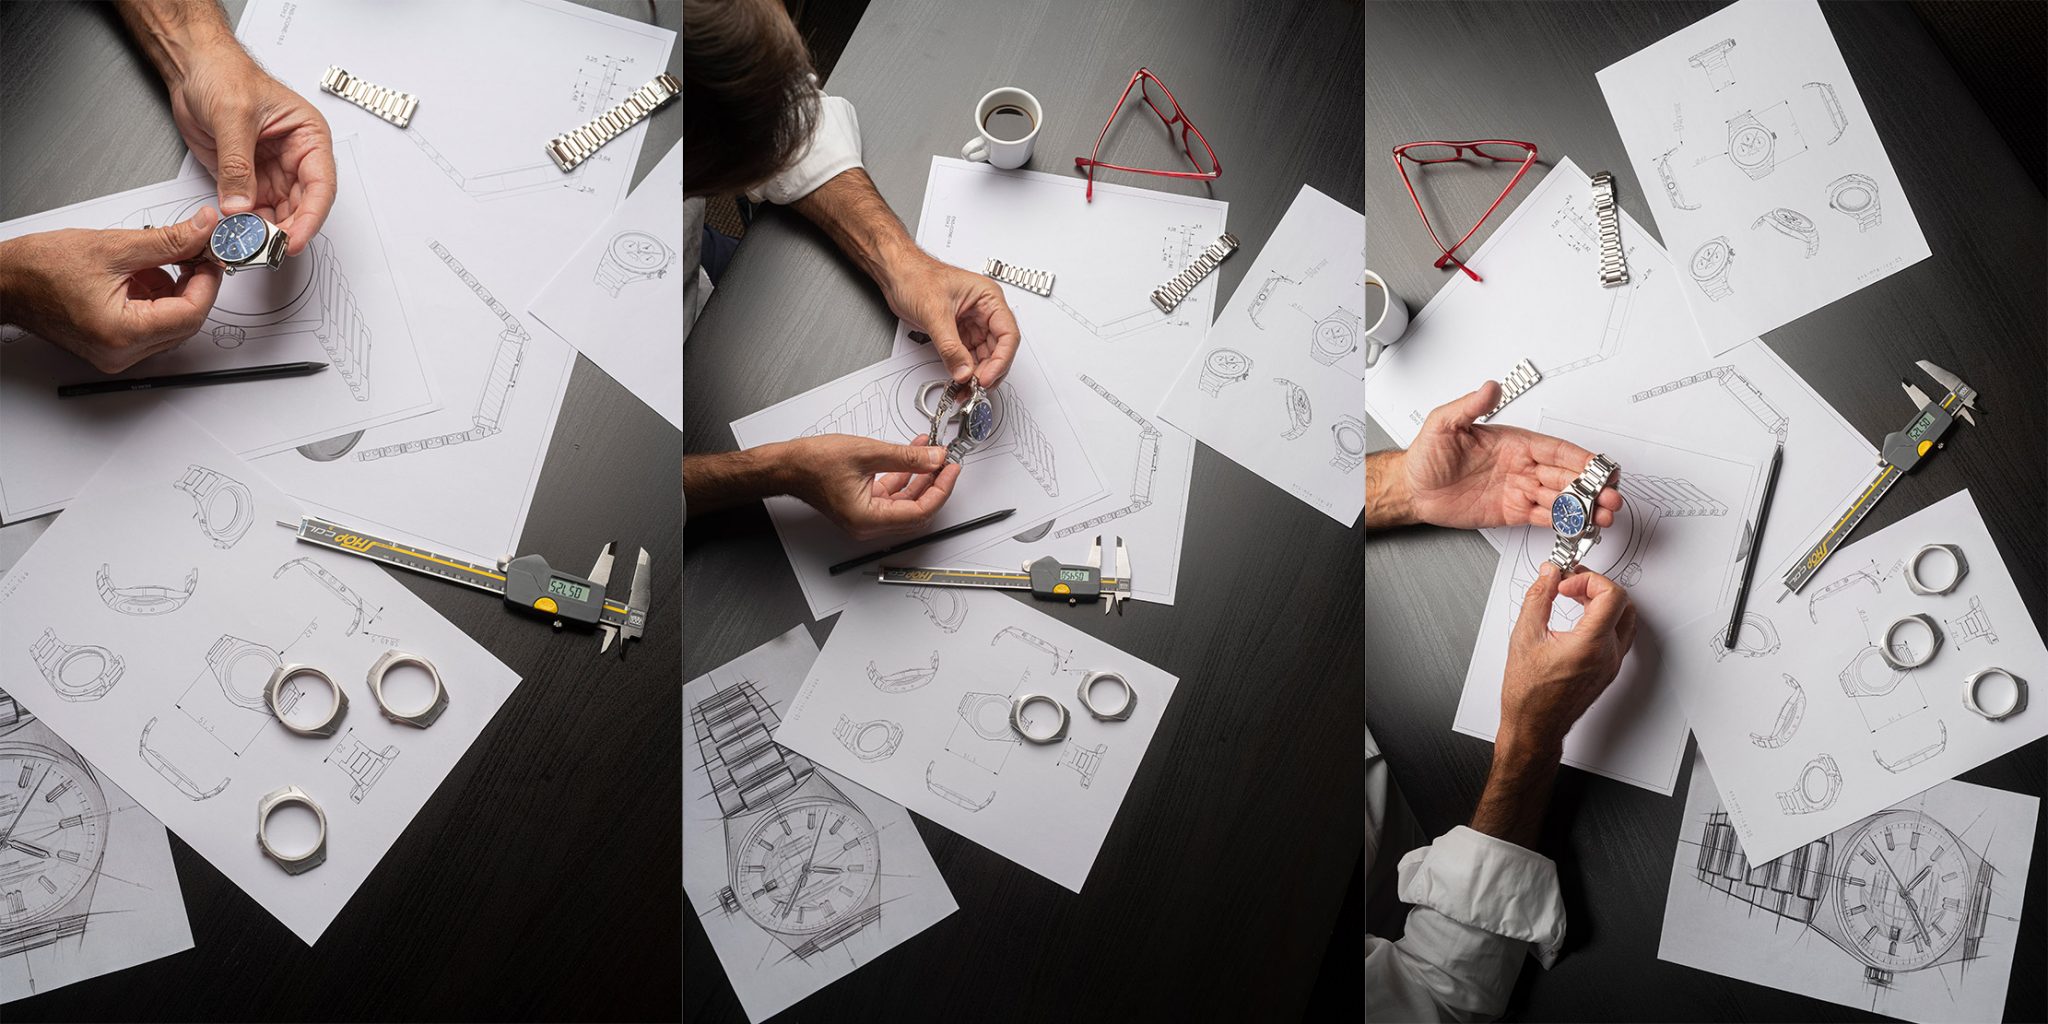 Frederique Constant Manufacture developing drawings blueprints